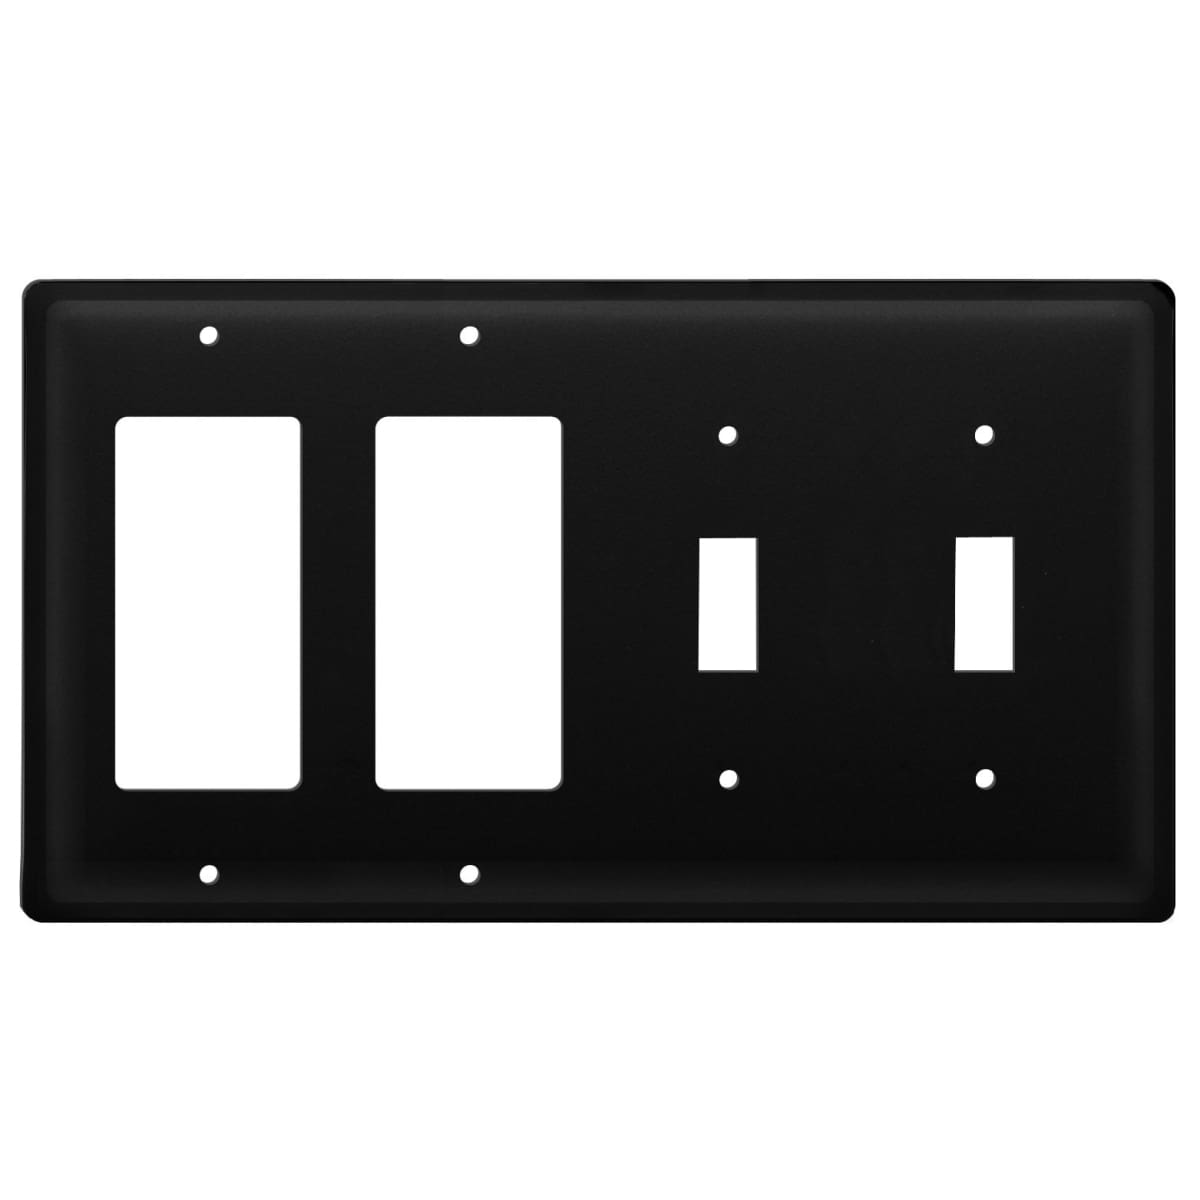 Quad Plain Double GFI and Double Switch Cover CUSTOM Product